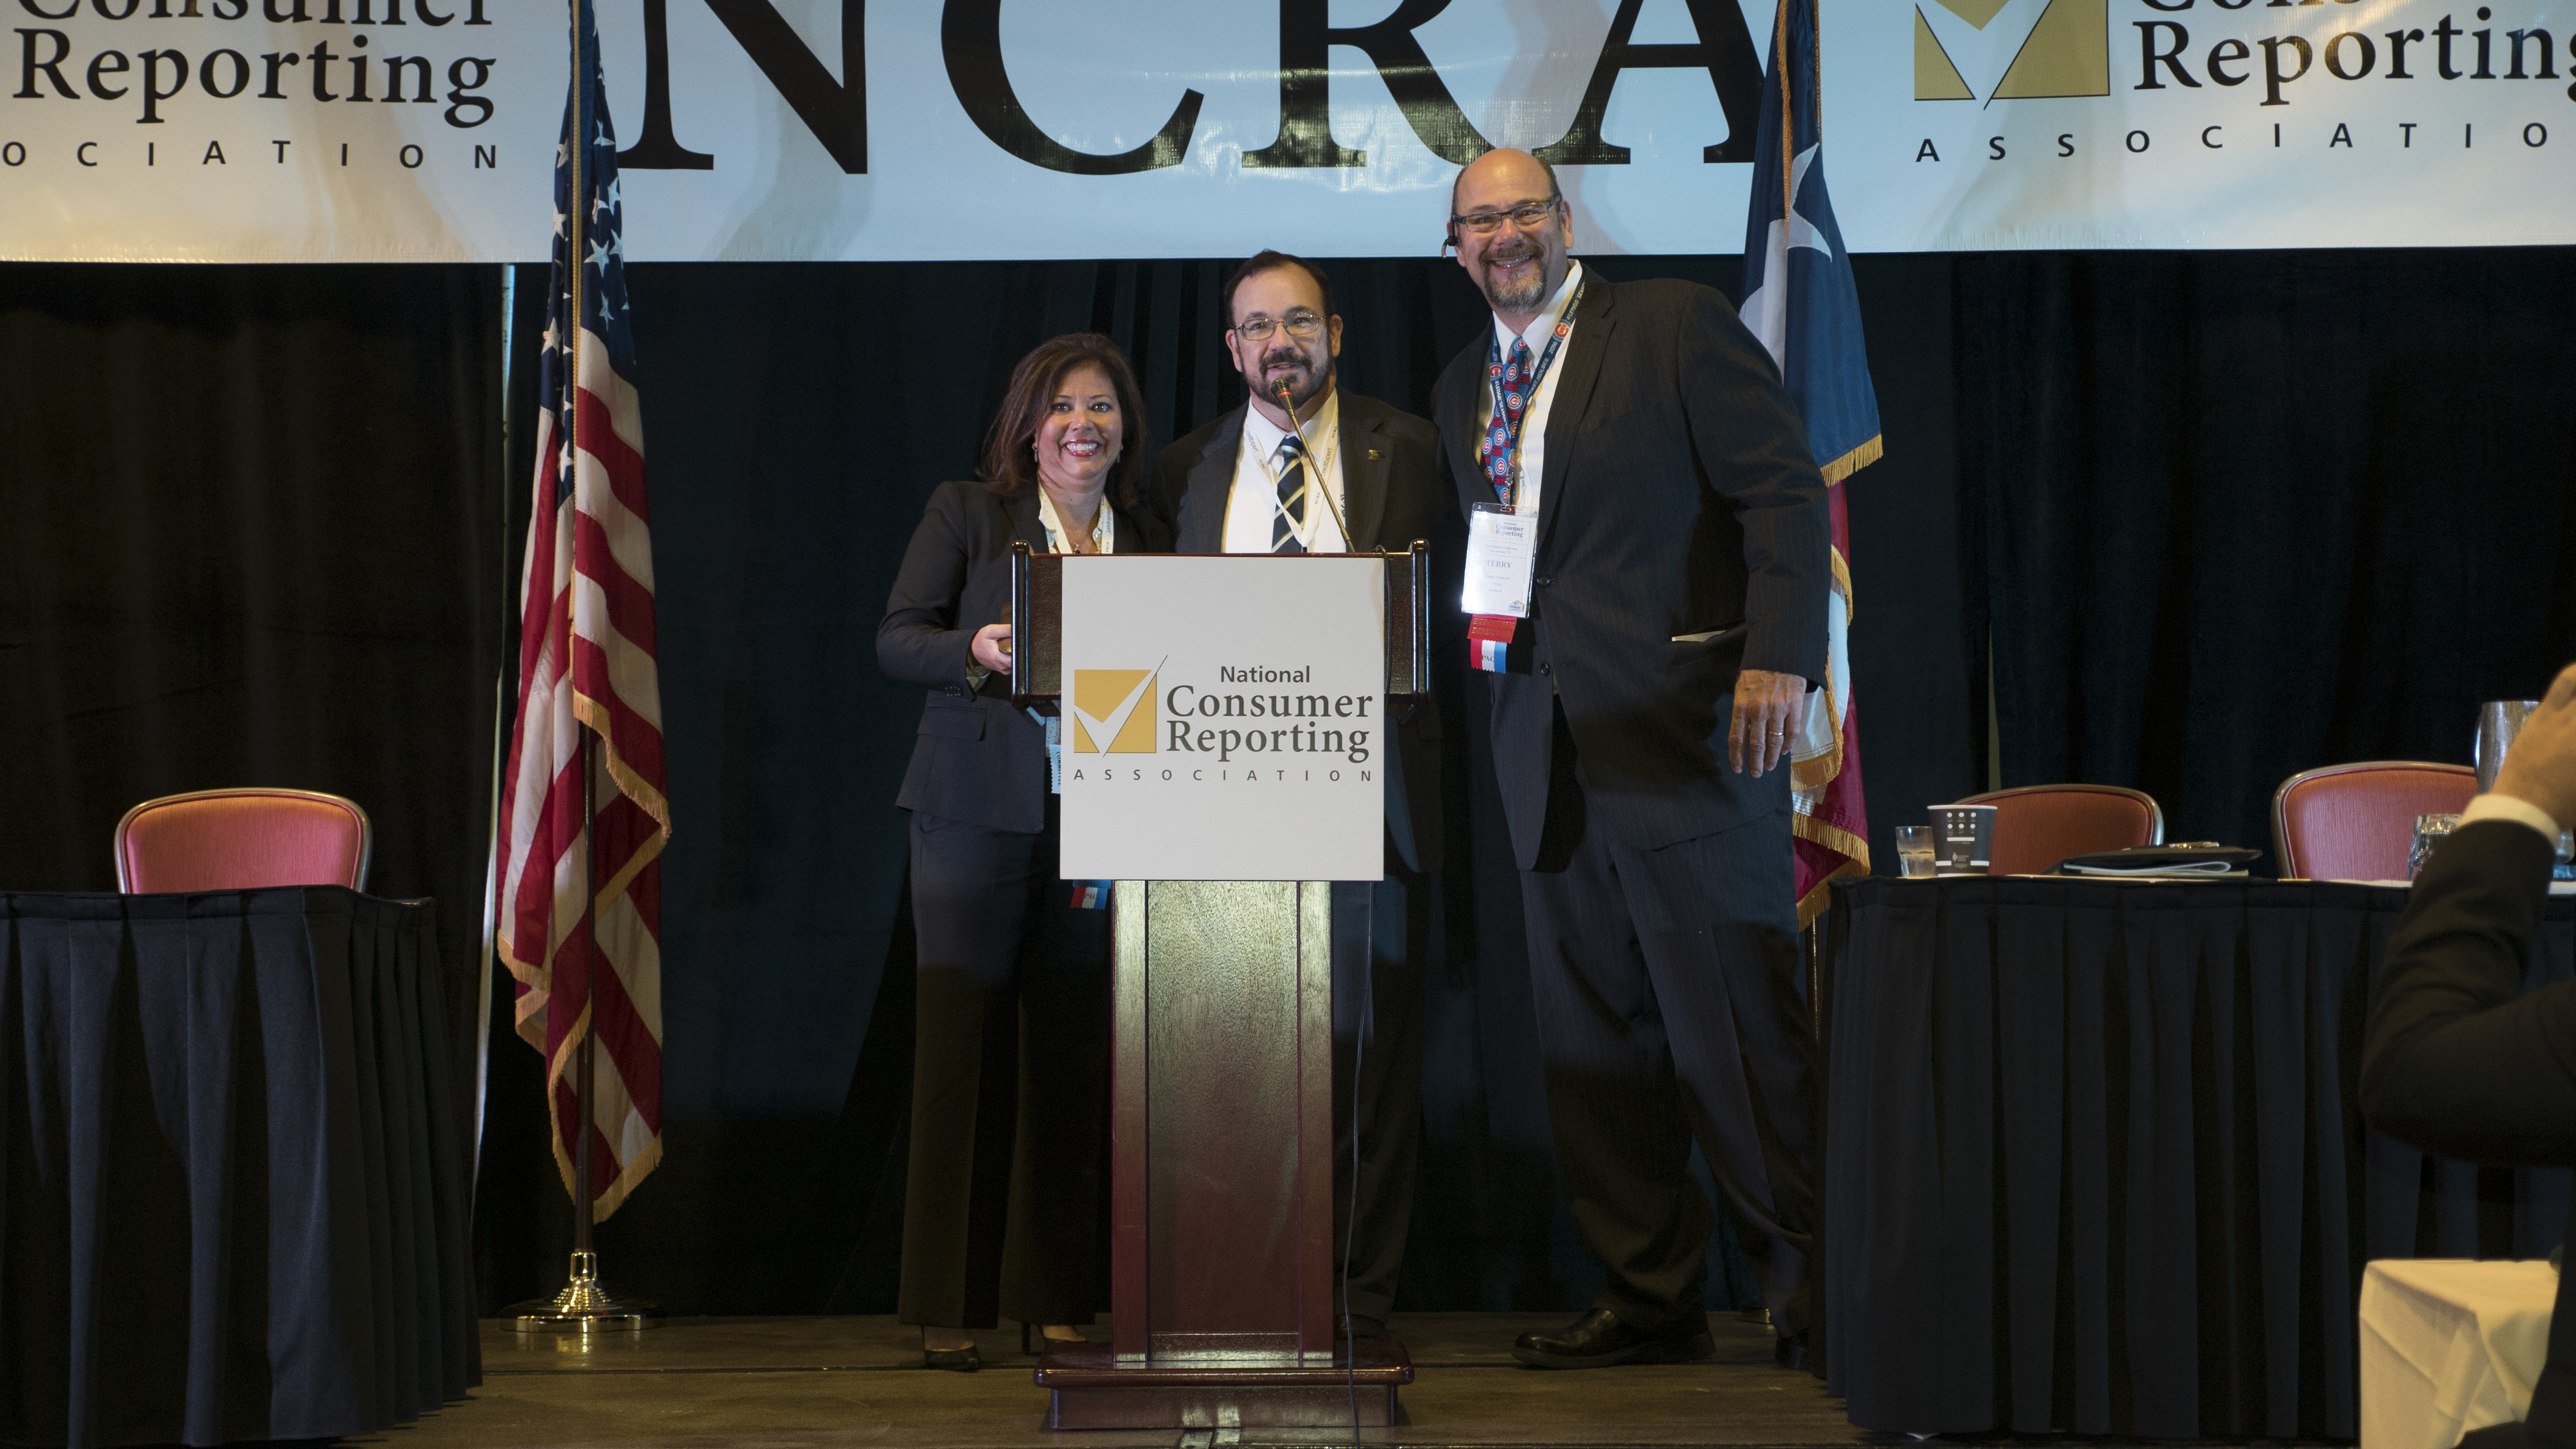 NCRA Incoming President Julie Wink, Past President Bill Bower and Executive Director Terry Clemans